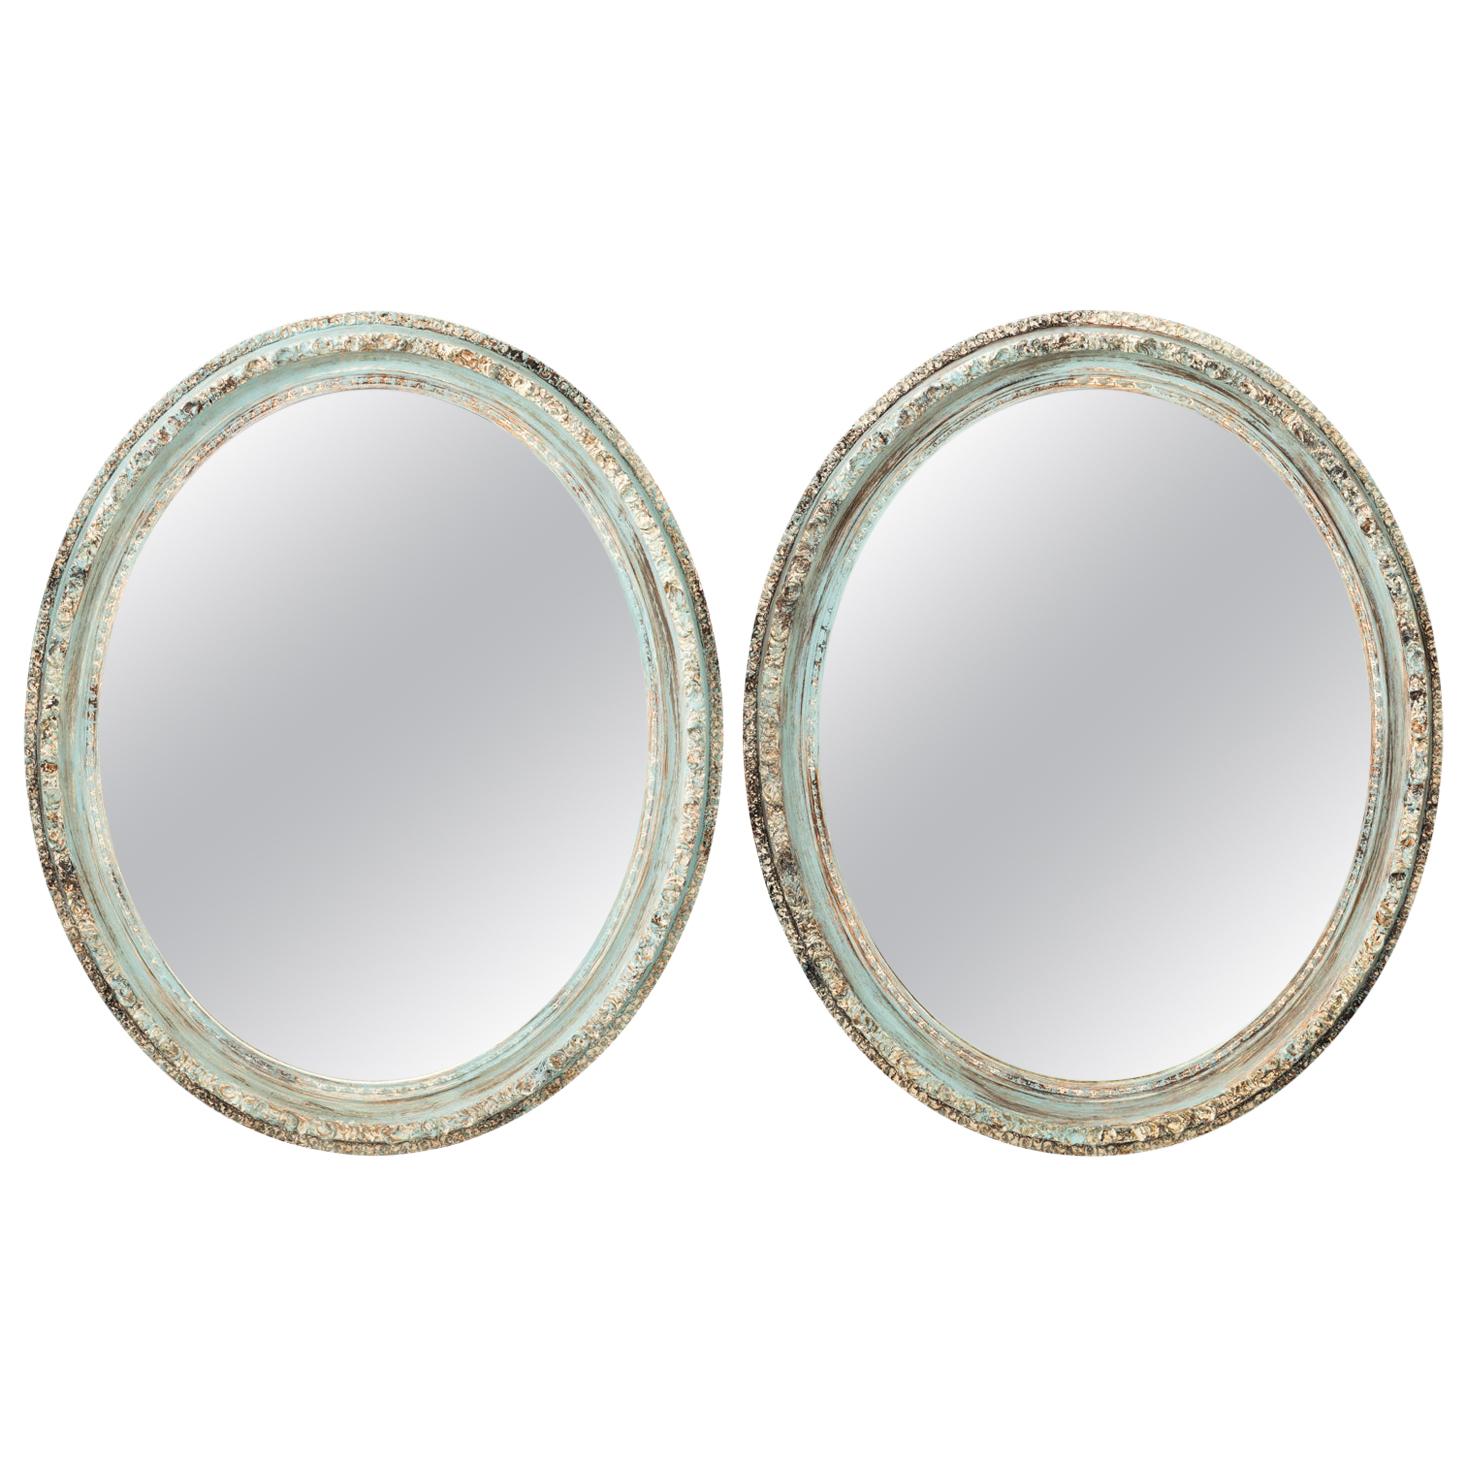 Pair of Large Blue Oval Mirrors